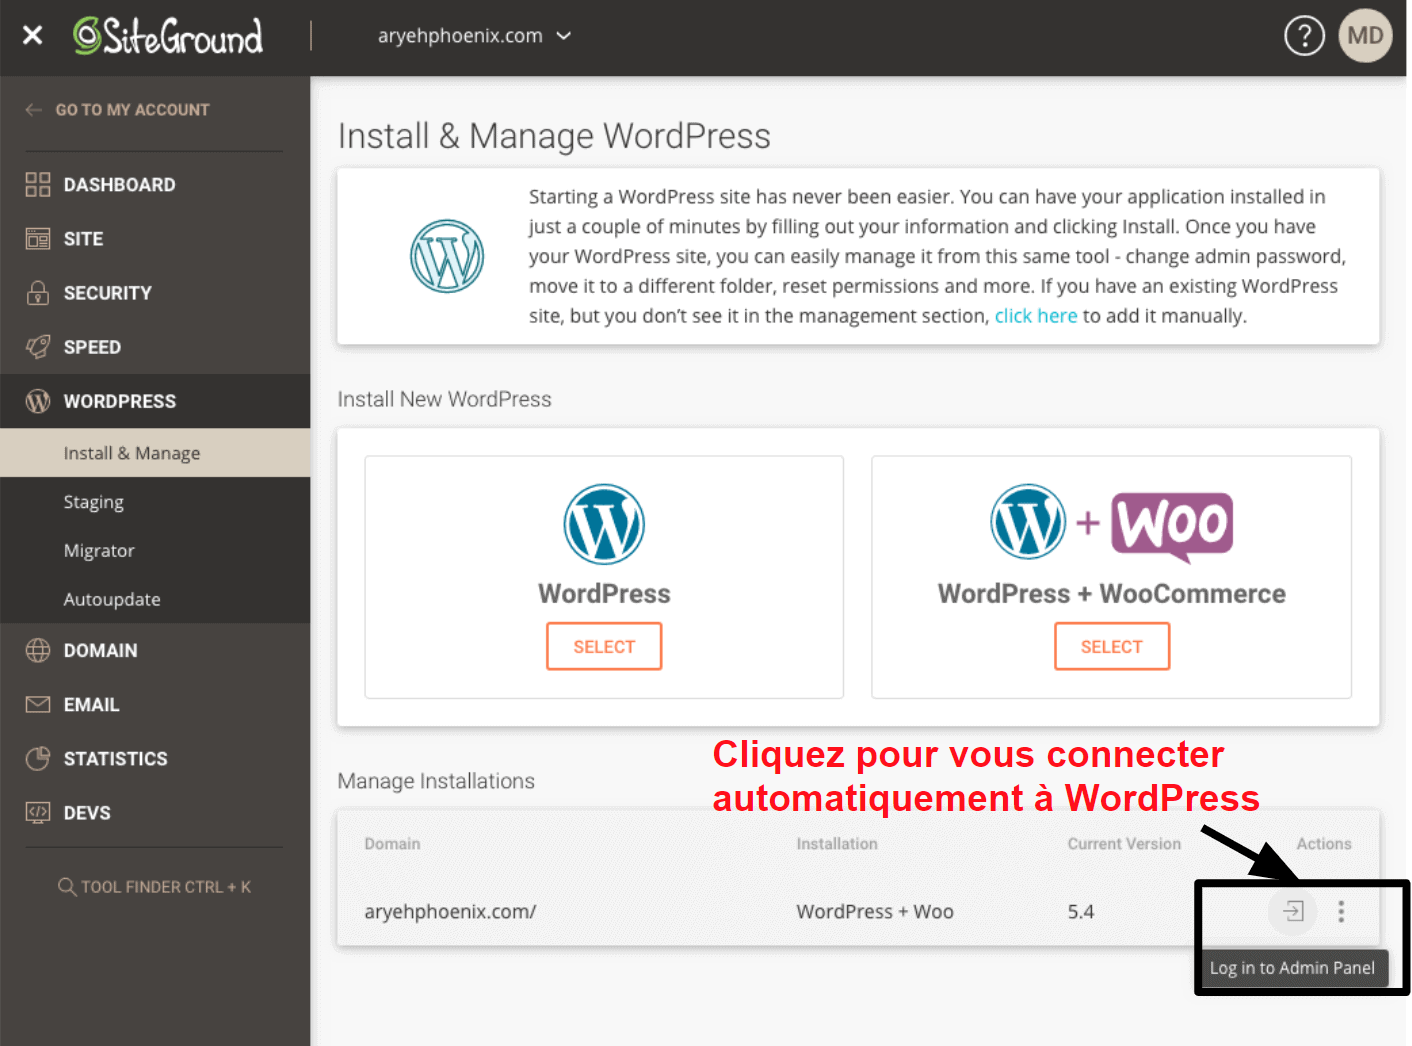 SiteGround offers a one click login option for your WordPress dashboard FR15